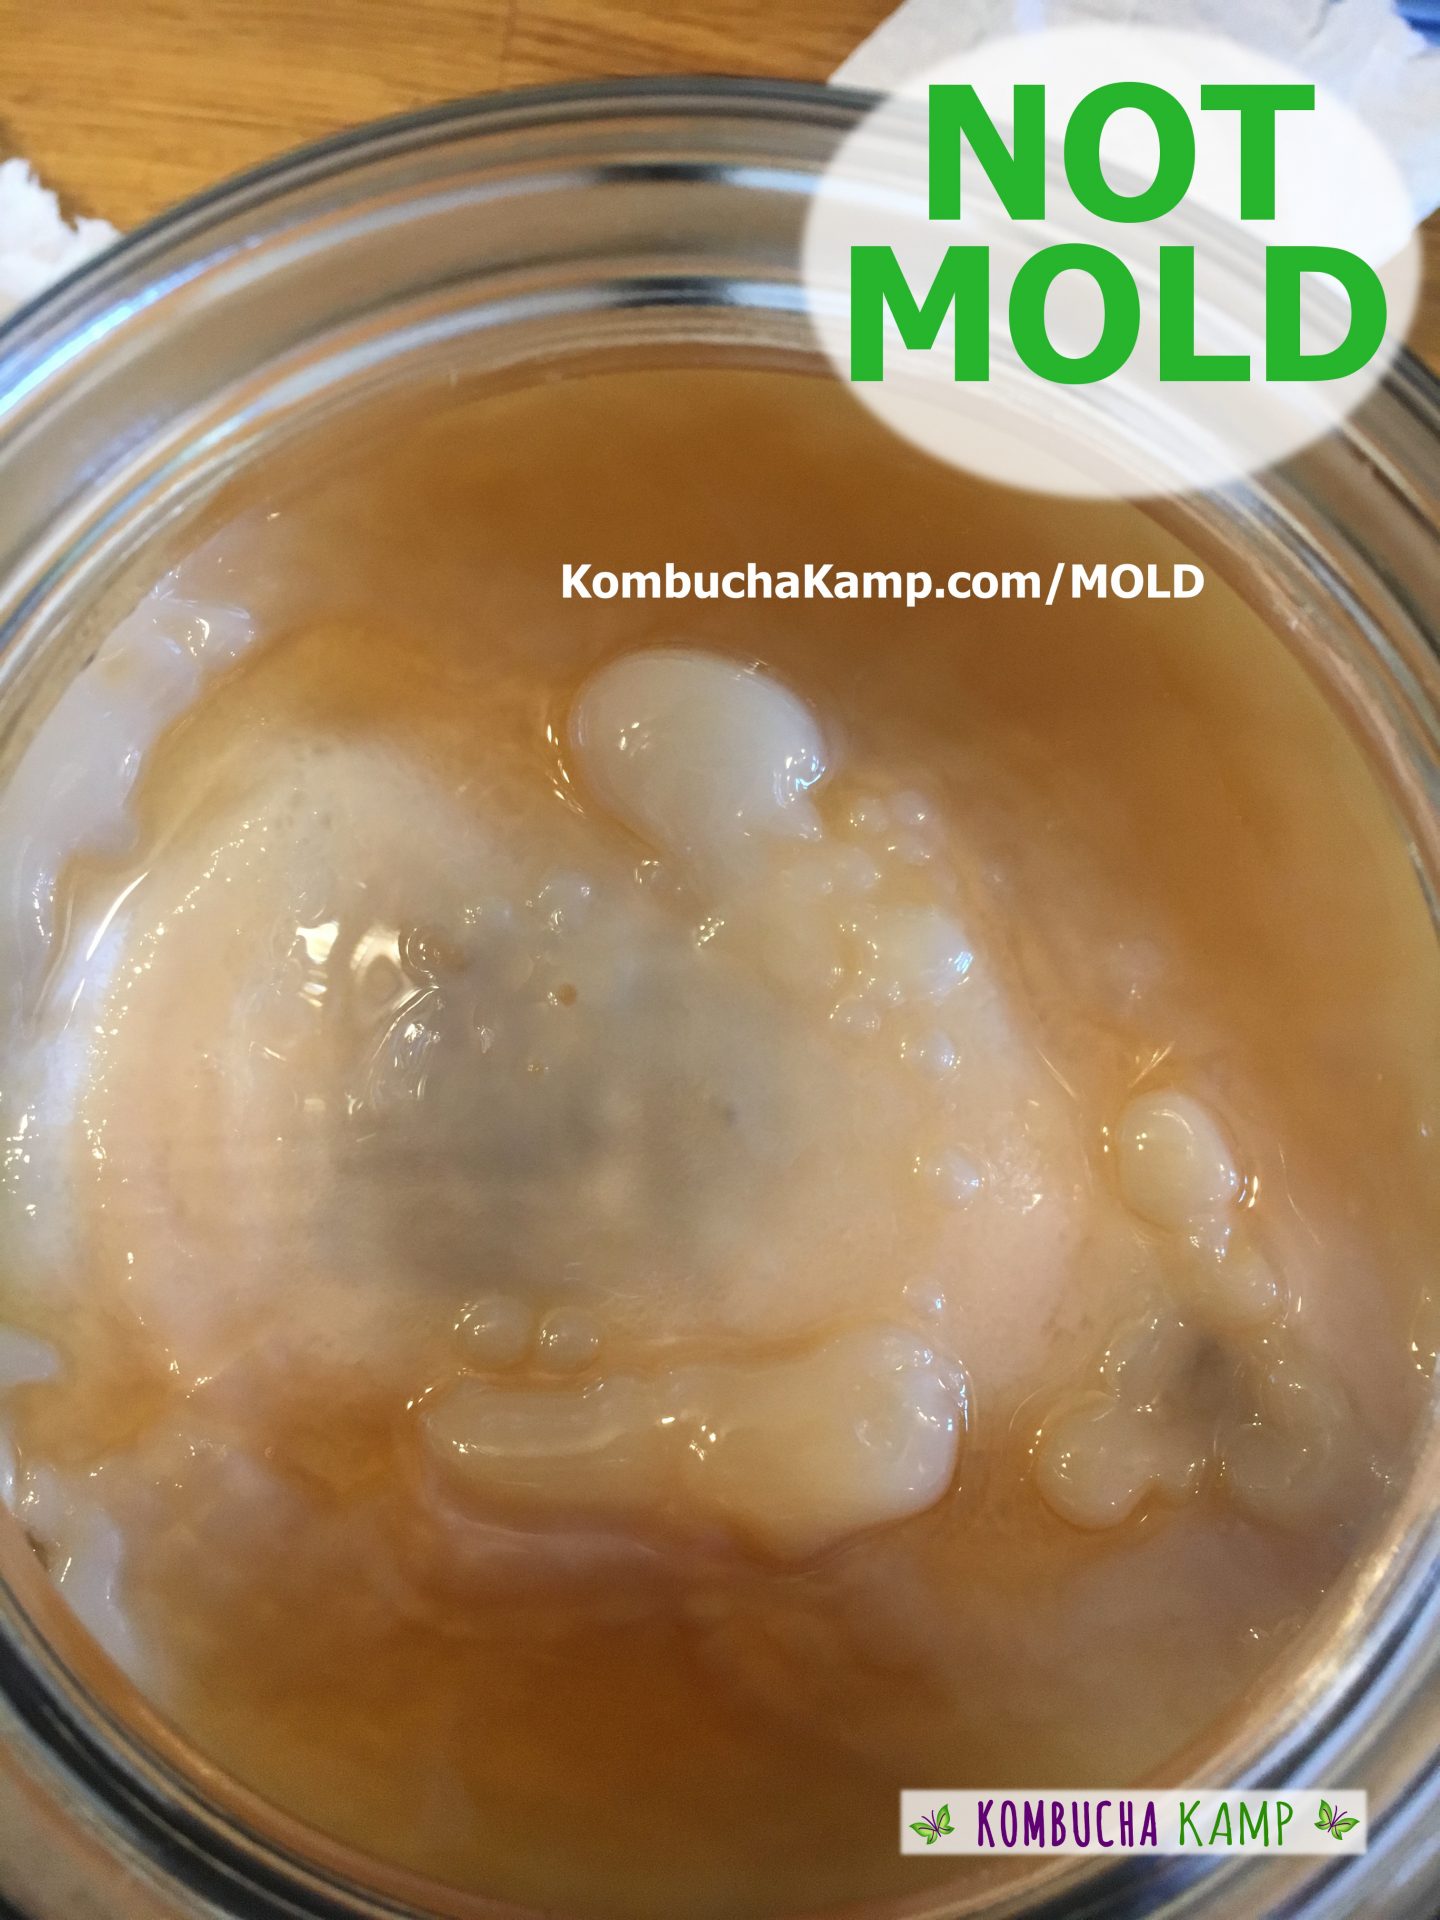 in this photo of new Kombucha SCOBY growth, we see large bulbous areas of white culture pushing up above the brew line, attaching to the original culture and with yeast embedded but no Kombucha mold